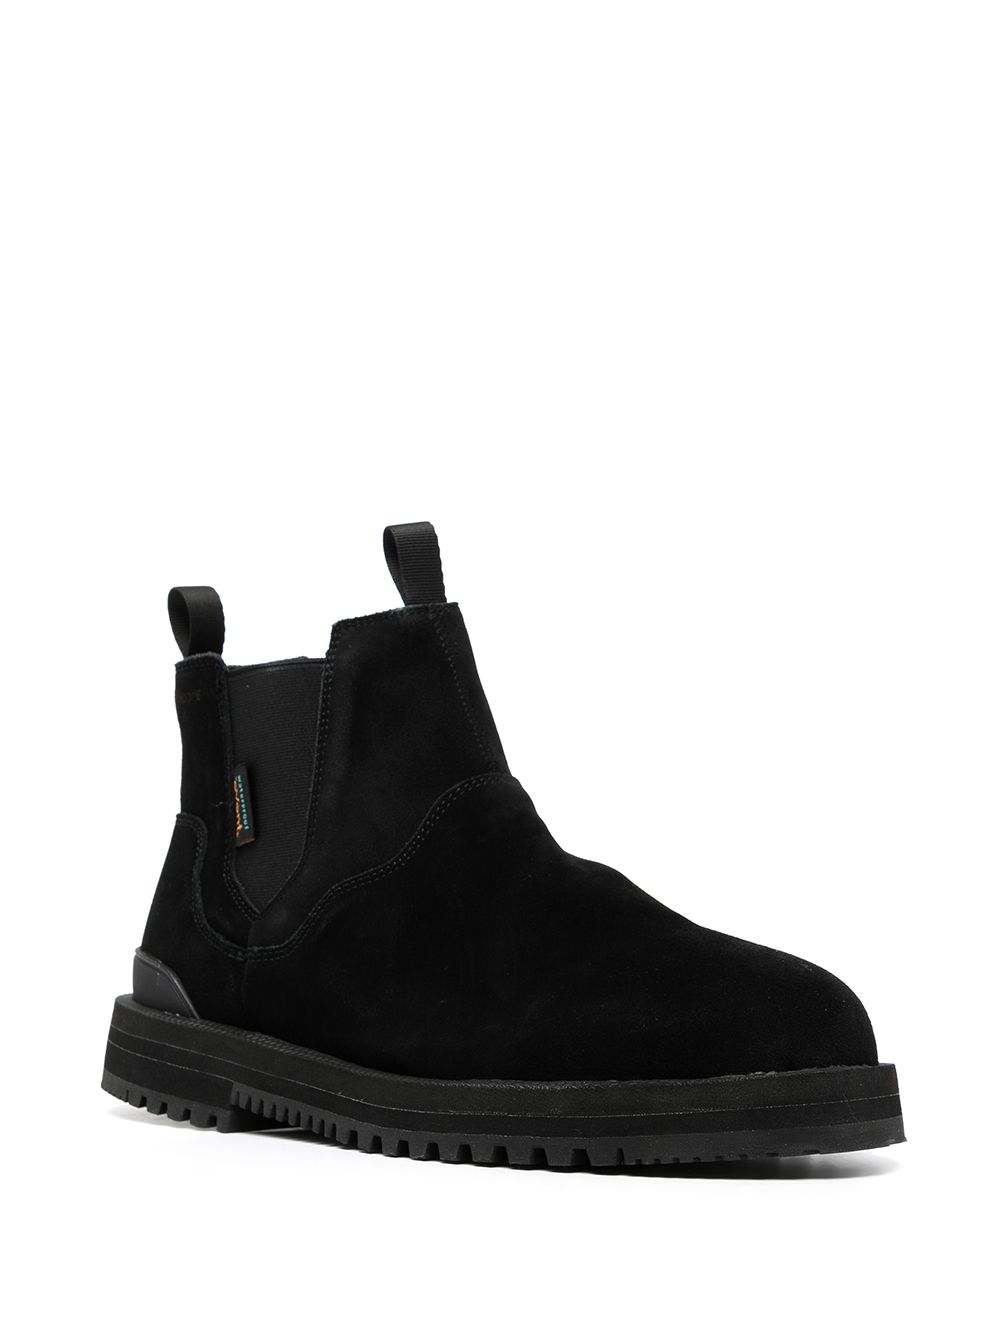 Image 2 of Suicoke GORE-Sevab ankle boots